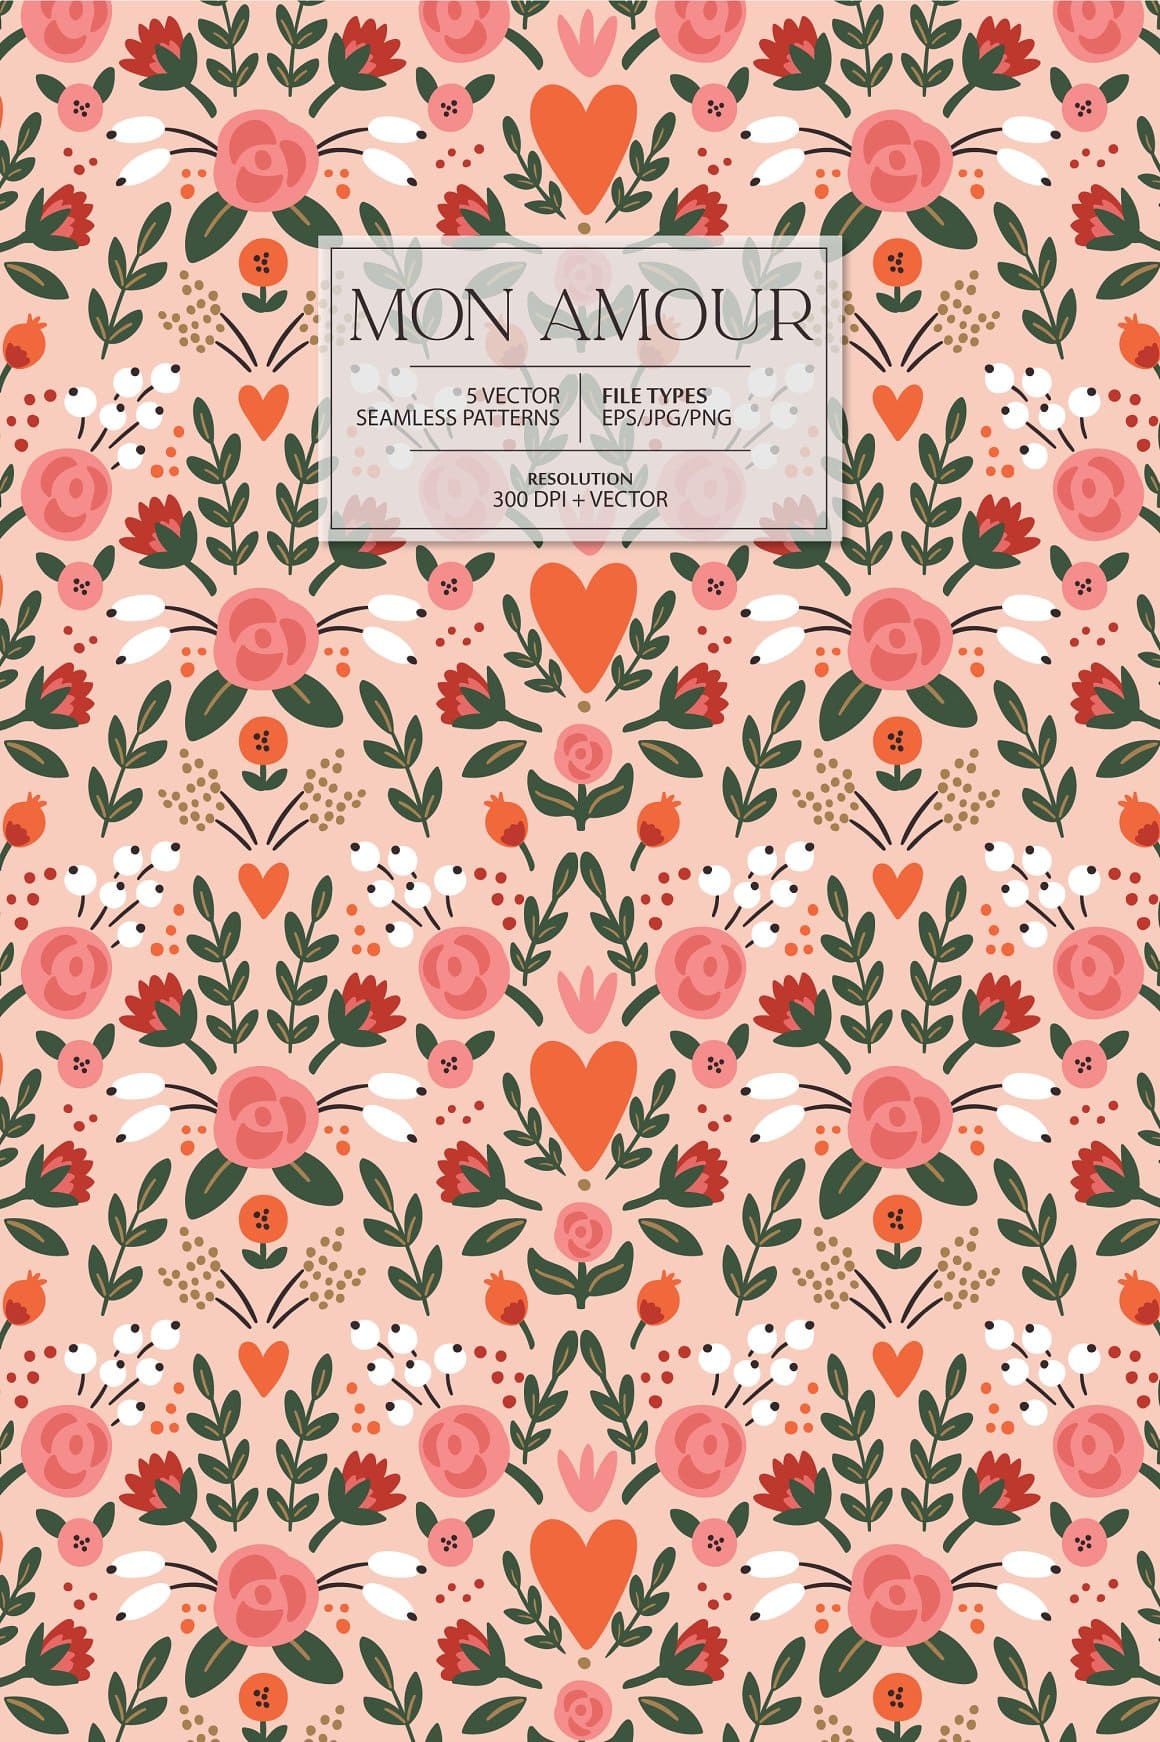 5 vector seamless patterns of Mon amour pattern.